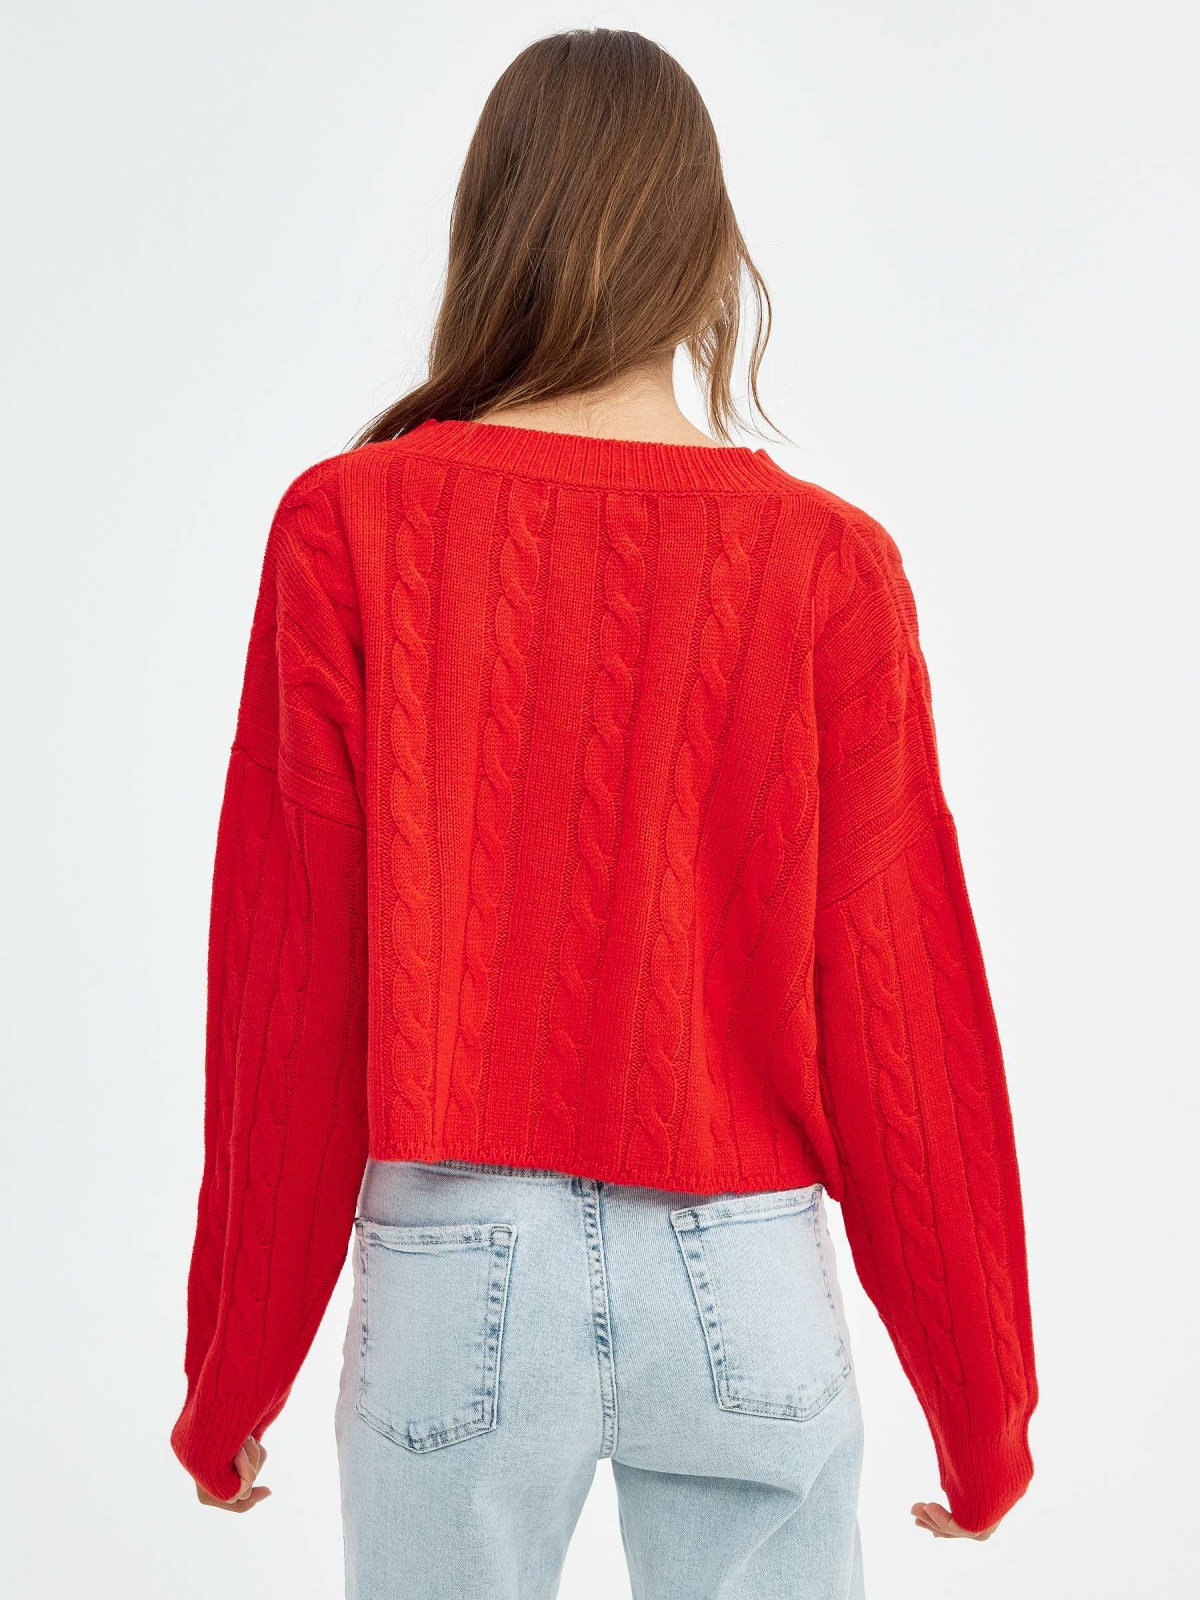 Eights sweater deep red middle back view